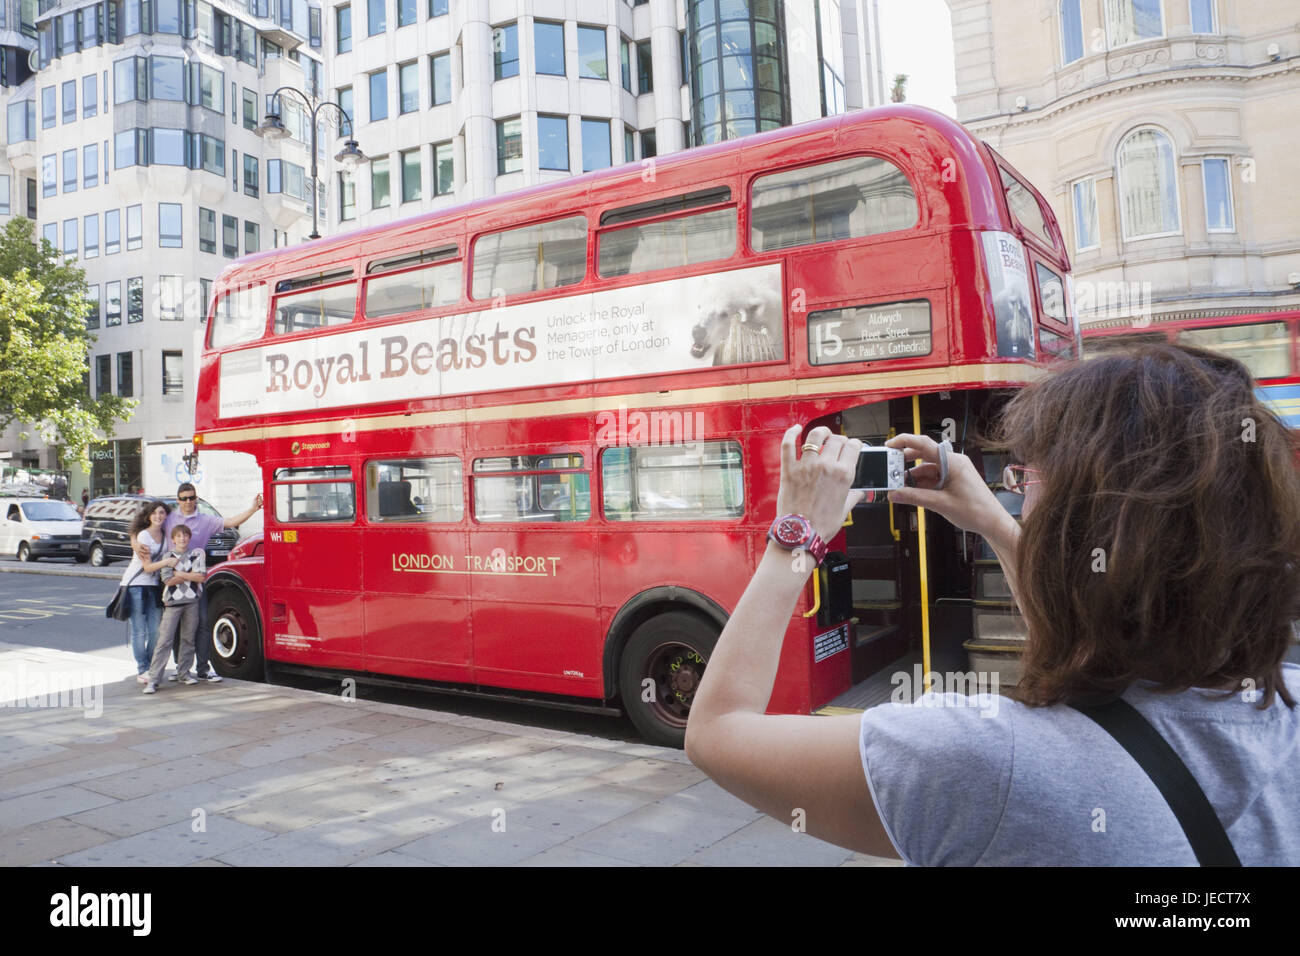 England, London, holiday snap before double-decker bus, route master bus, town, photo, family, tourist, family photo, bus, red, vacation, double-decker bus, attraction, Stock Photo